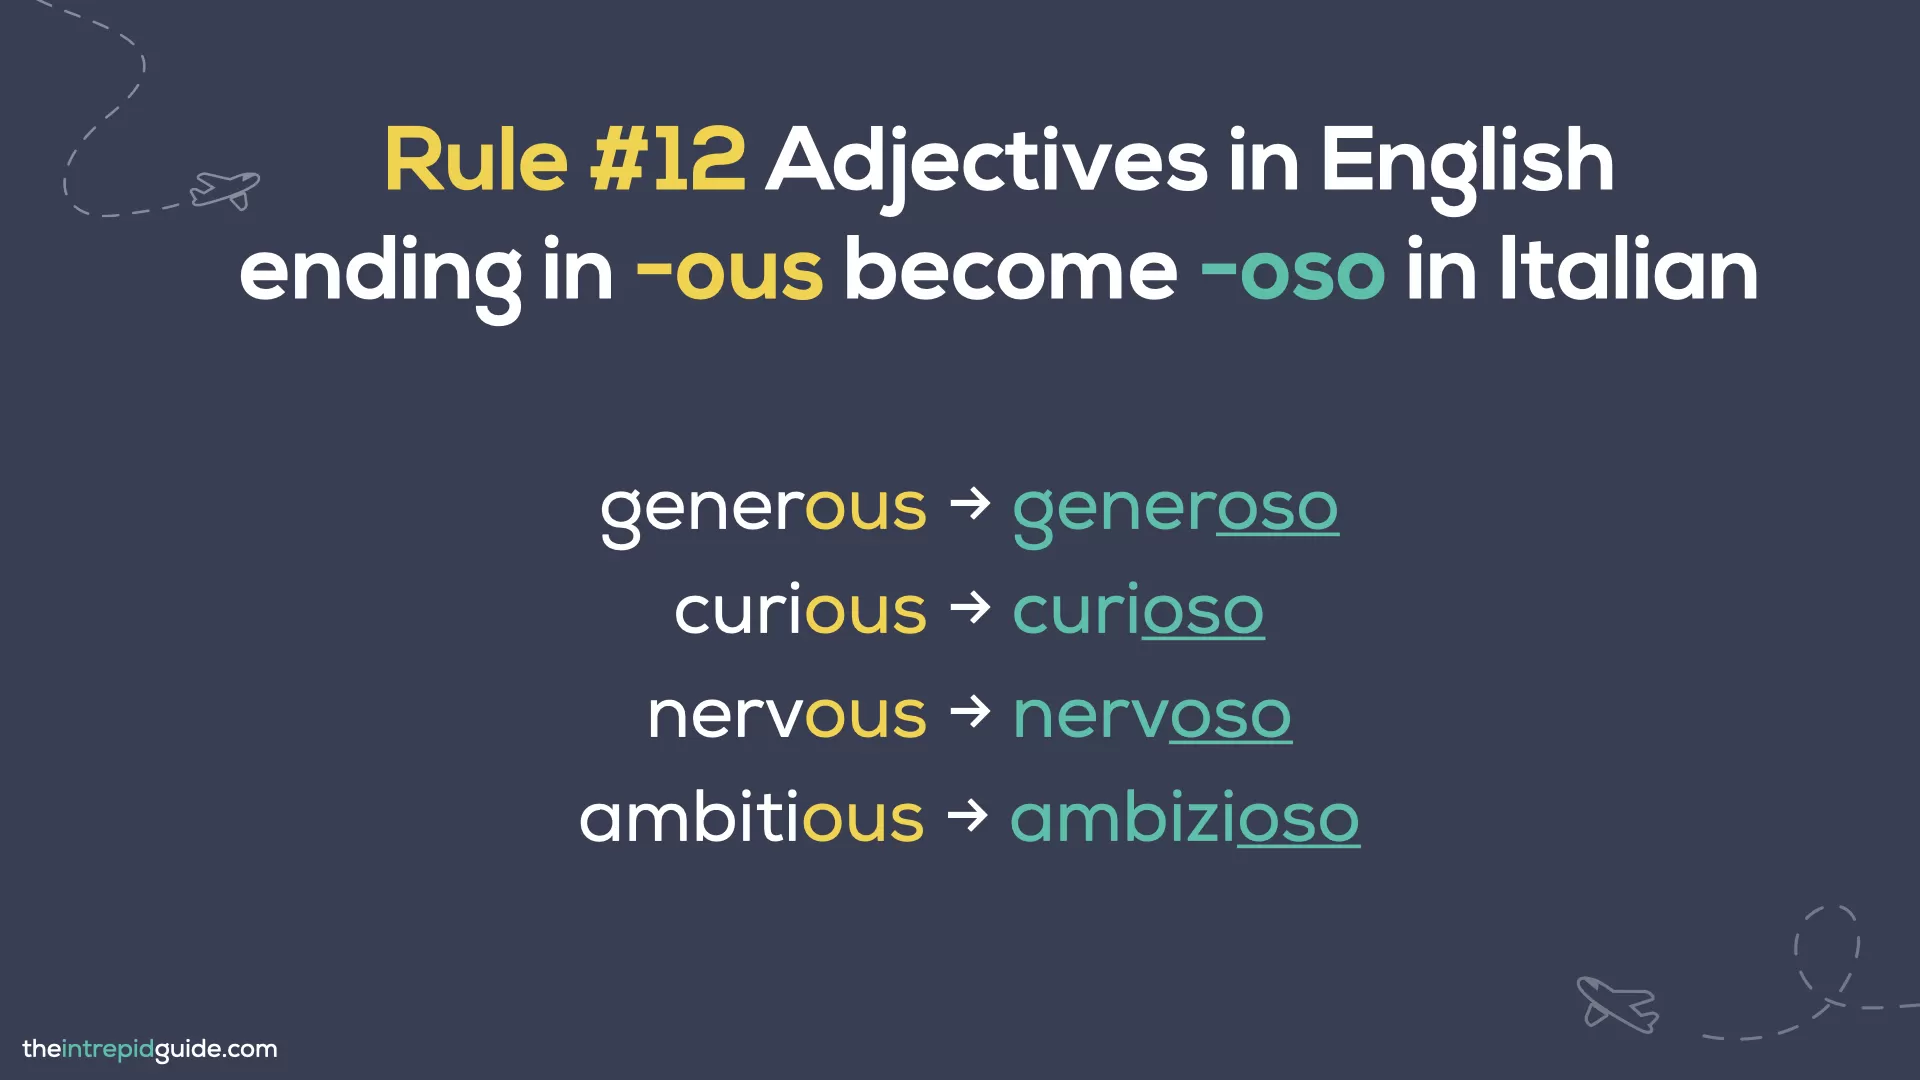 Italian cognates and loan words - Rule 12 - Adjectives in English ending in -ous become -oso in Italian